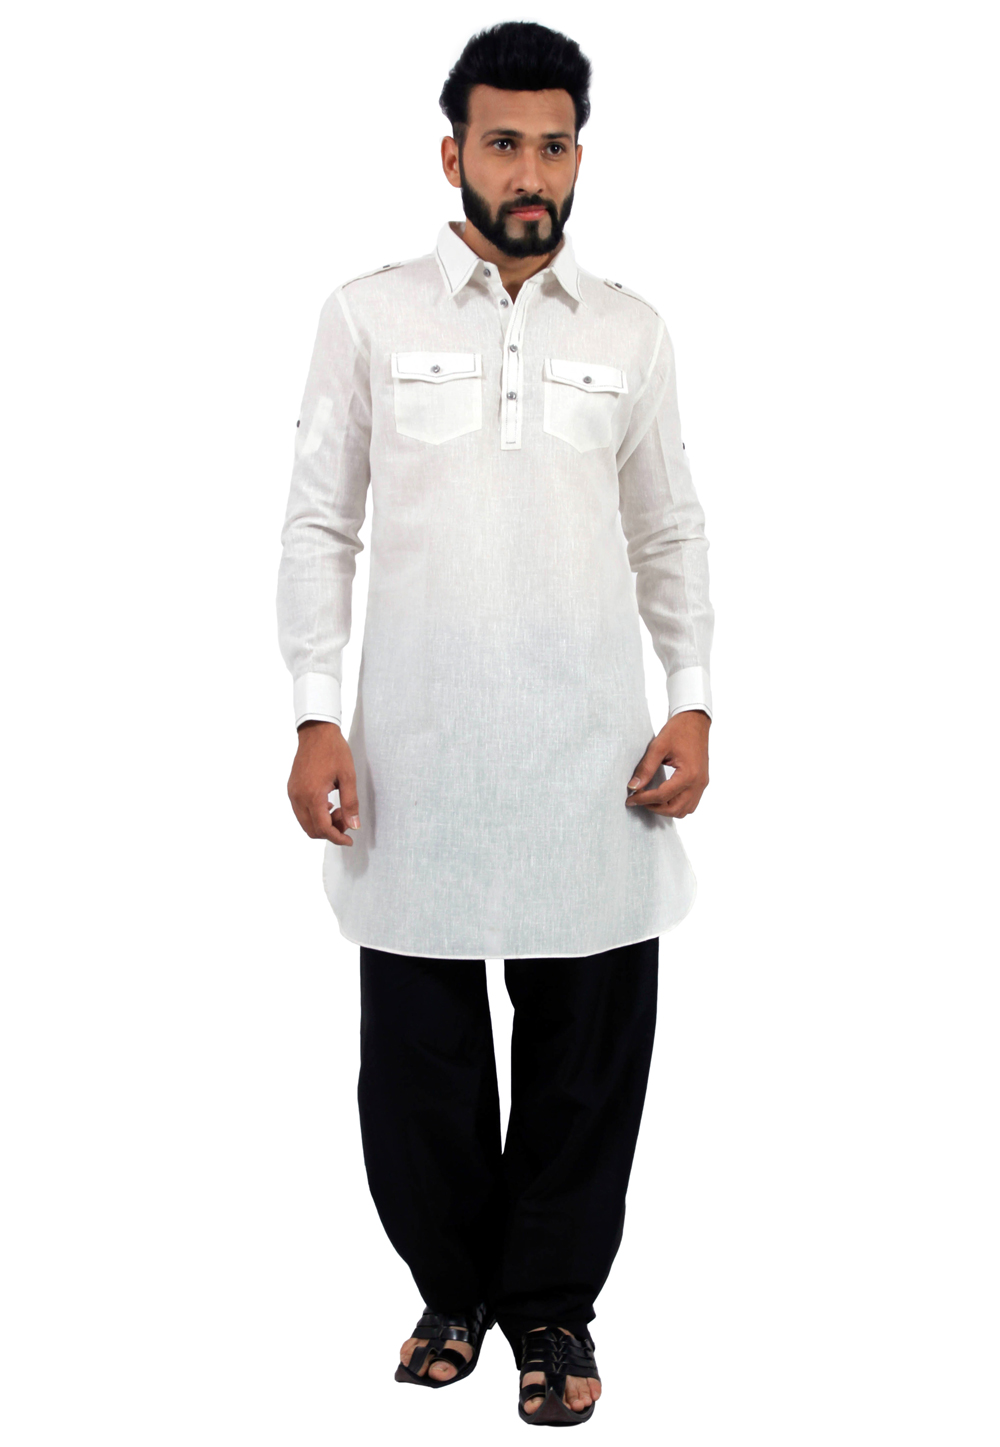 Off White Cotton Readymade Pathani Suit 166345